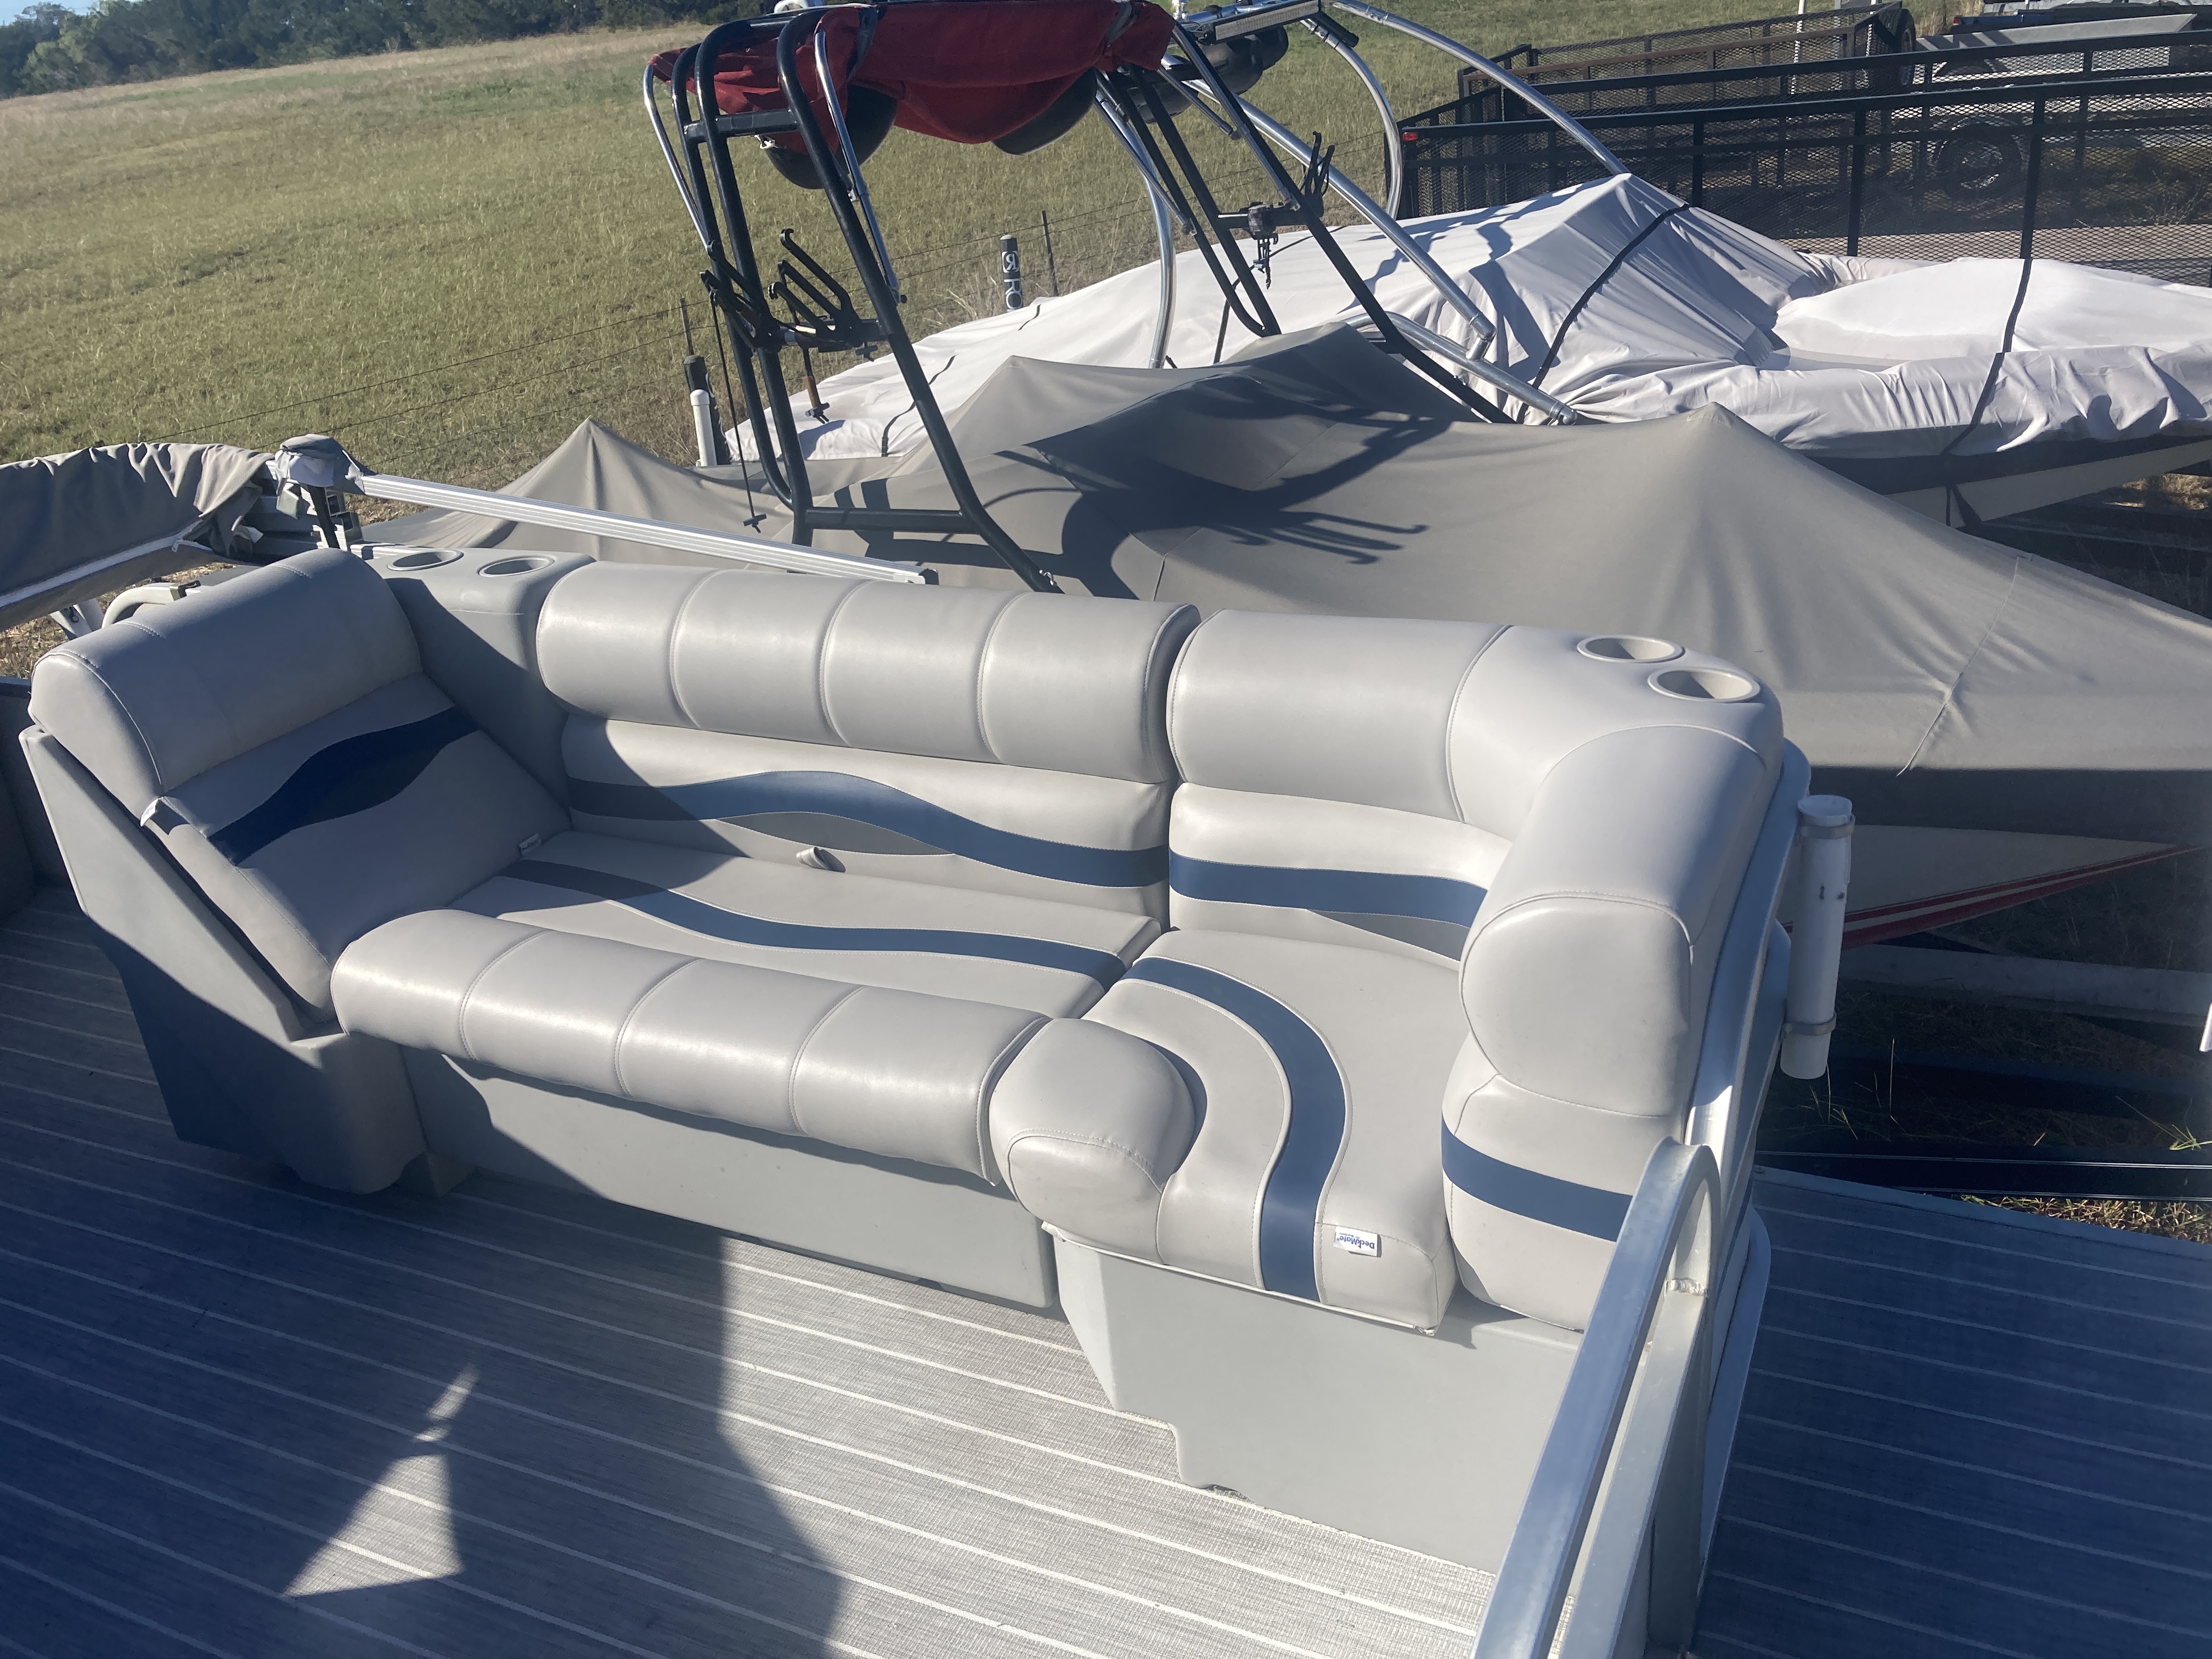 1999 24 foot Other Beachcomber Power boat for sale in Briarcliff, TX - image 17 